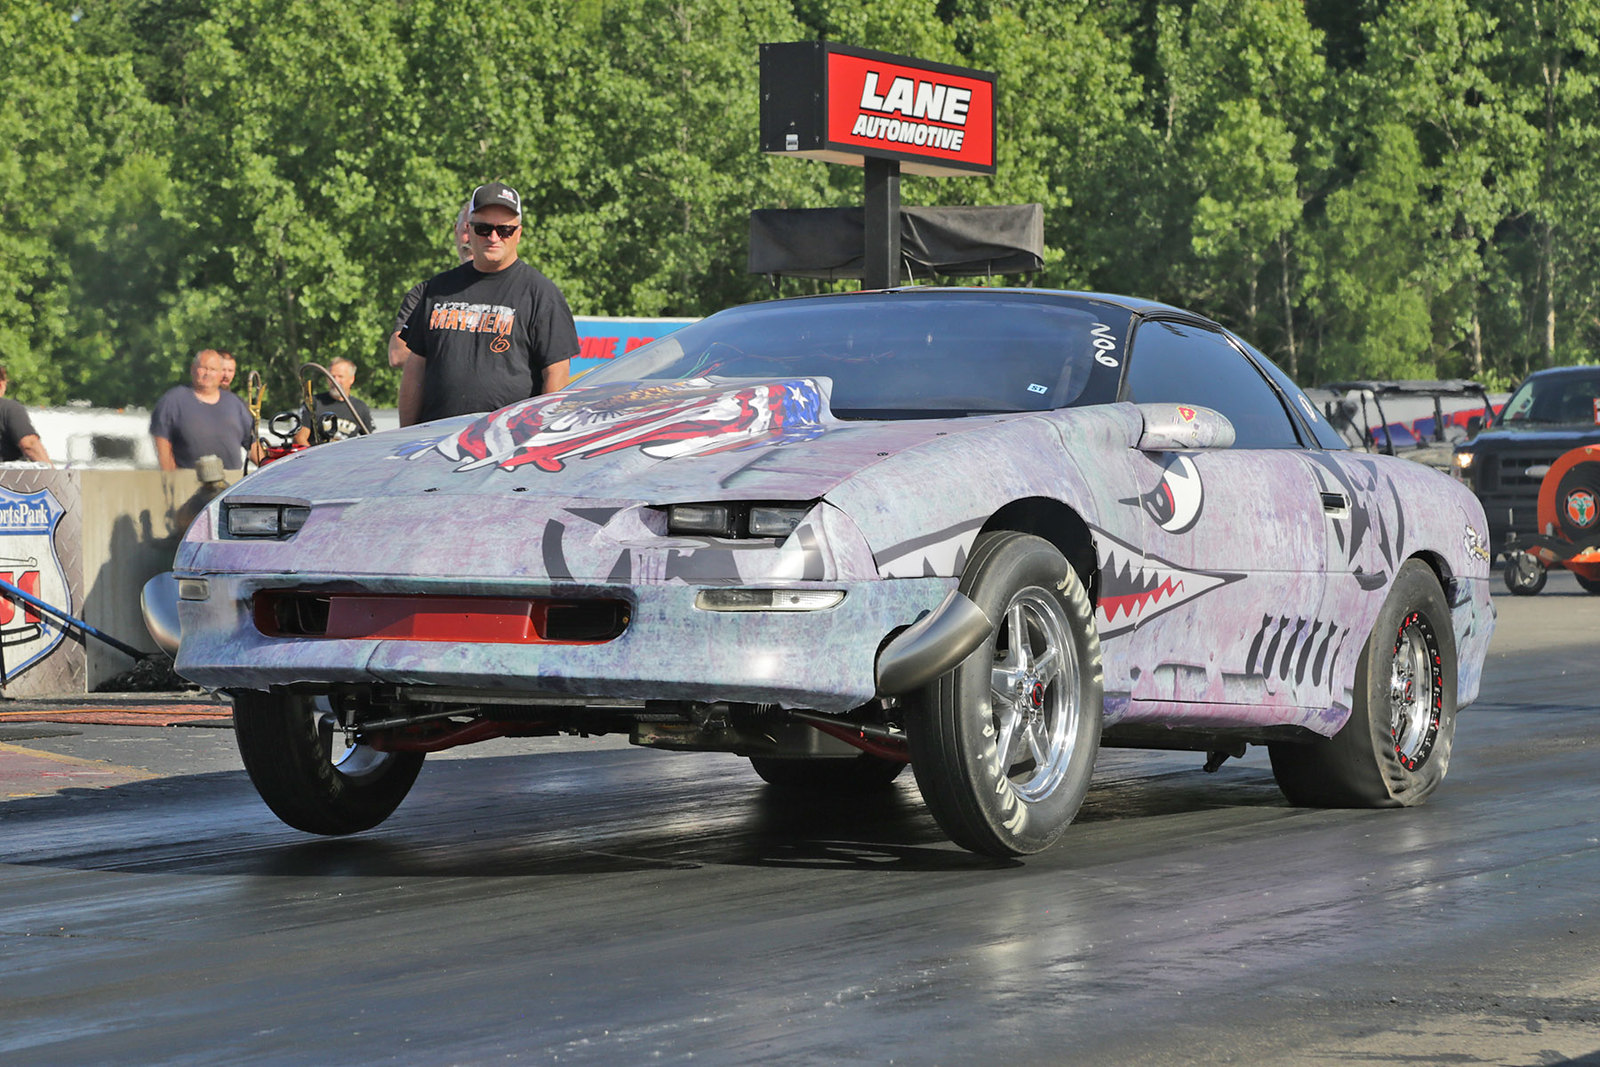 Motor State KnockOut No-Prep Drag Event held at US 131 Motorsports Park in Martin, Michigan